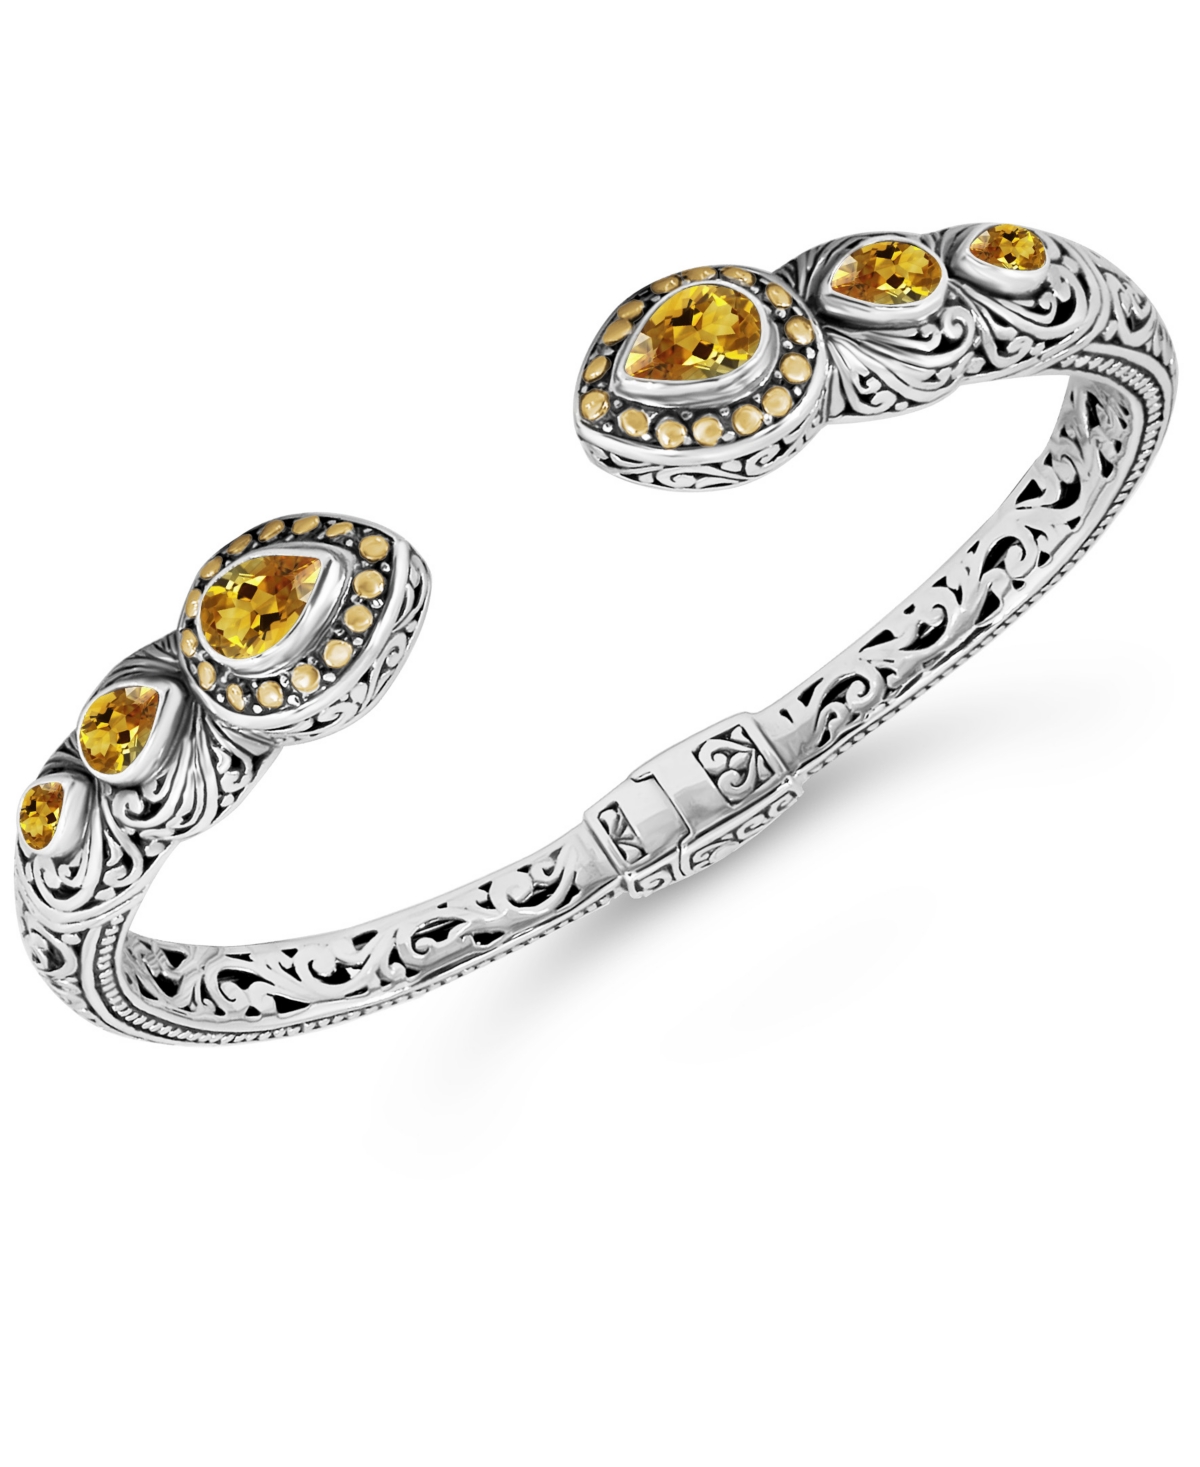 Citrine & Bali Ubud Cuff Bracelet in Sterling Silver and 18K Gold - Silver